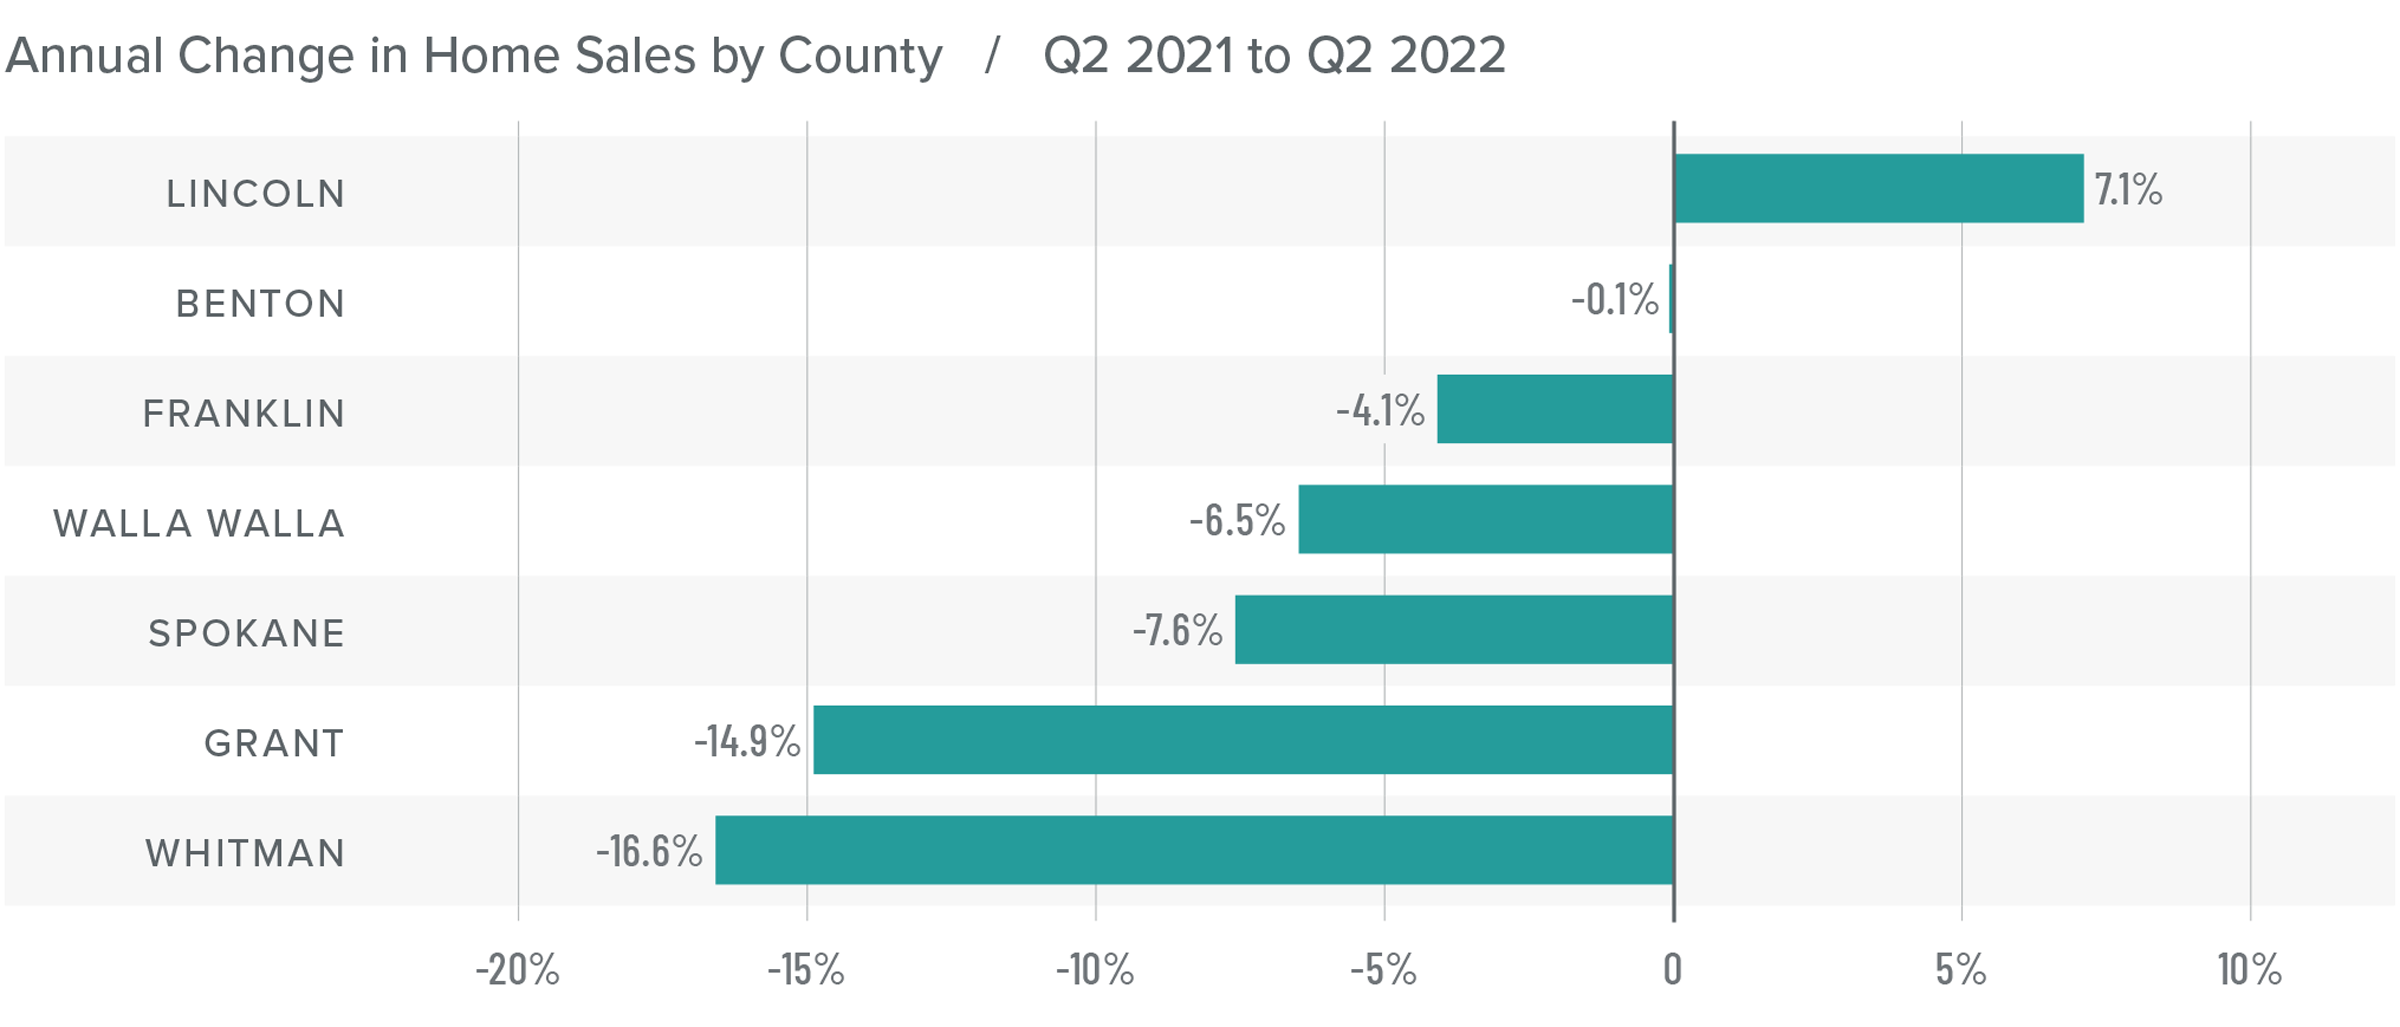 A bar graph showing the annual change in home sales for various counties in Eastern Washington from Q2 2021 to Q2 2022. Six out of the seven counties listed show negative percentage year-over-year changes: Lincoln at 7.1%, followed by Benton at -0.1%, Franklin at -4.1%, Walla Walla at -6.5%, Spokane at -7.6%, Grant at -14.6%, and Whitman at -16.6%.